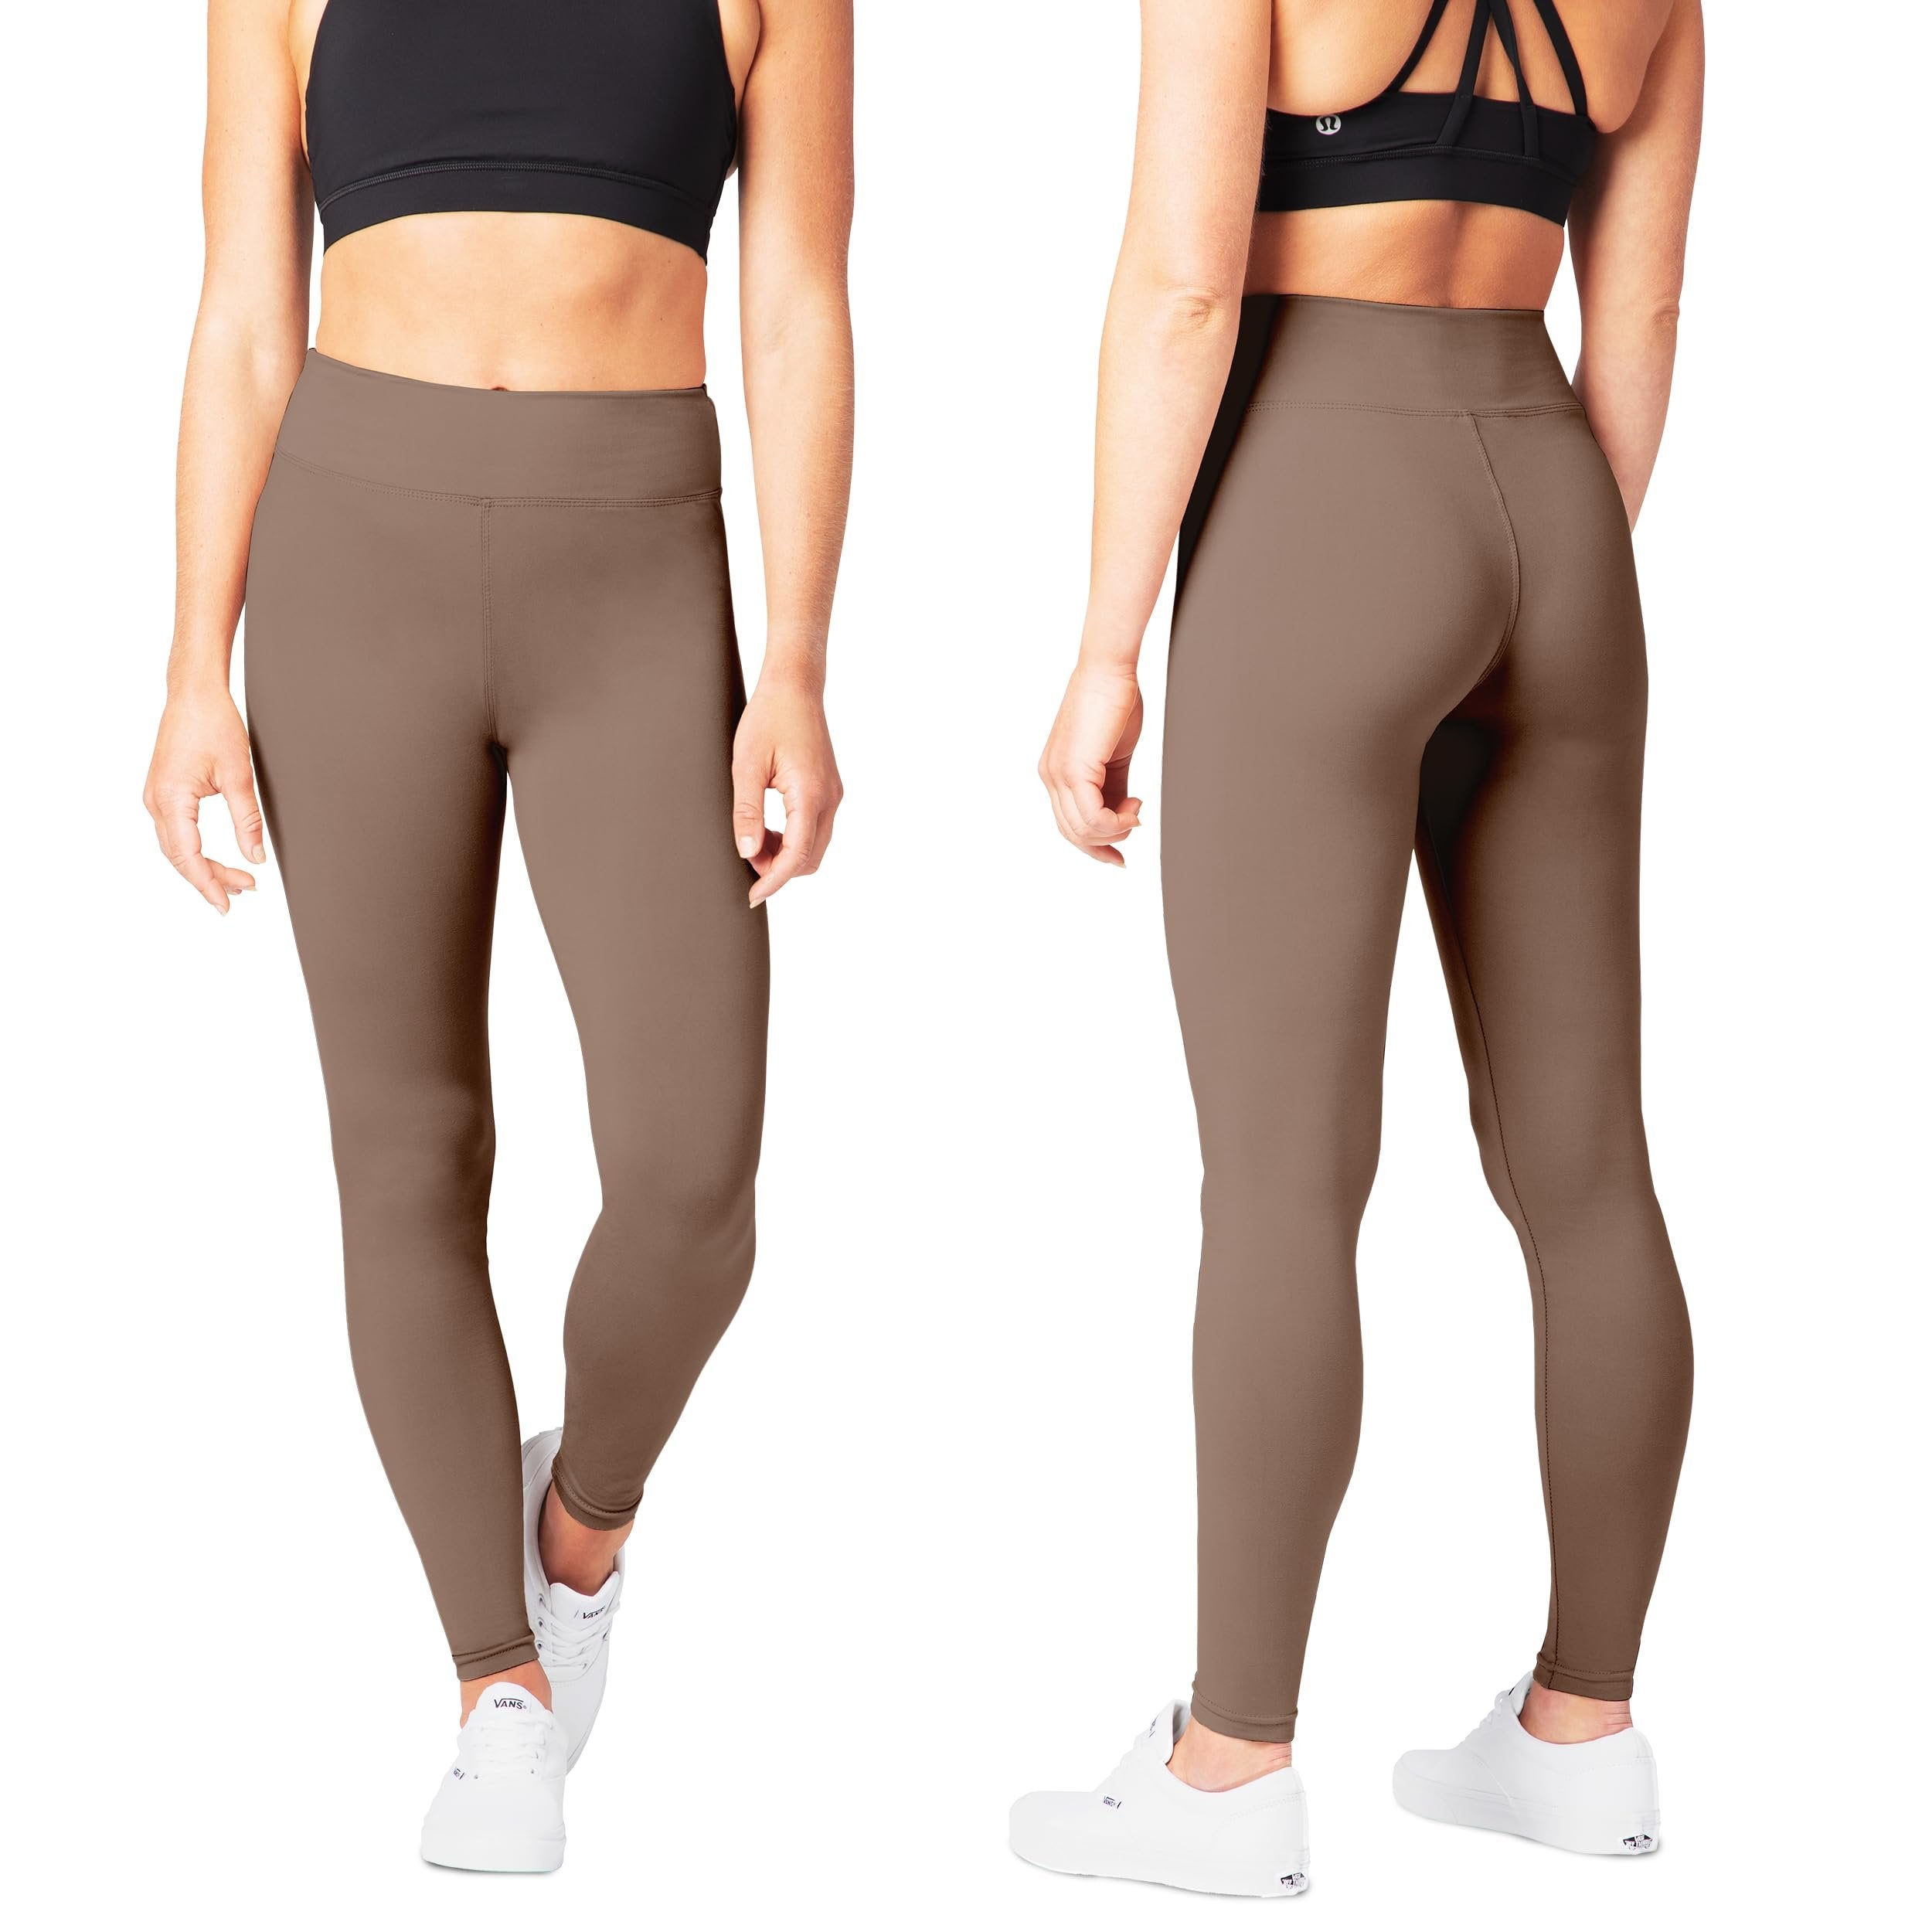 SATINA High Waisted Leggings with Pockets for Women - Workout Leggings for Regular & Plus Size Women - Tan Leggings Women - Yoga Leggings for Women |3 Inch Waistband (One Size, Tan)